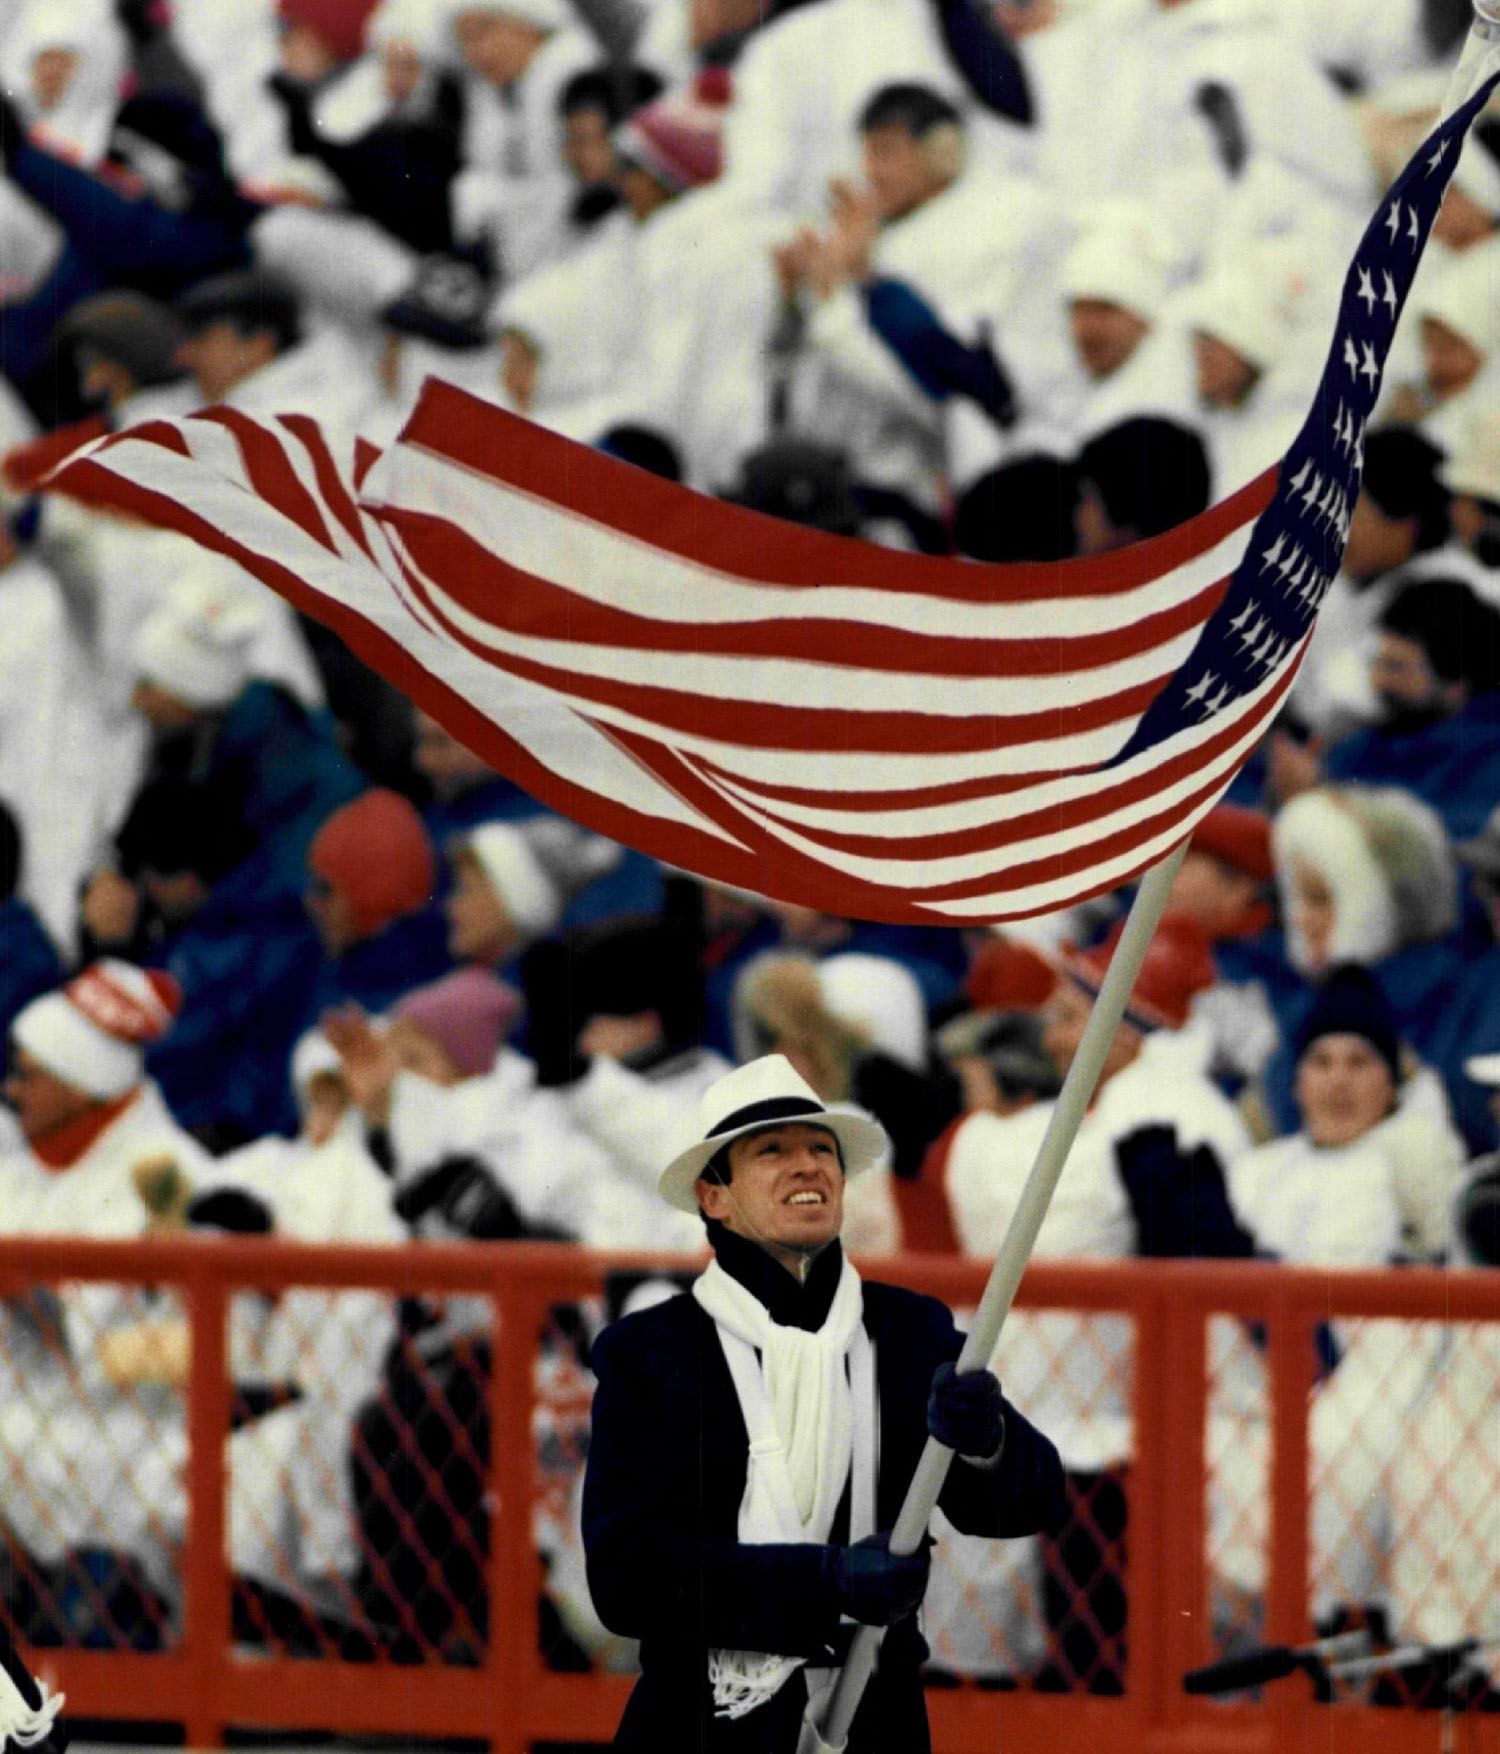 Biathlon athlete Lyle Nelson carries the flag during the opening of the 1988 Winter Olympics in Calgary, Aberta, Canada.